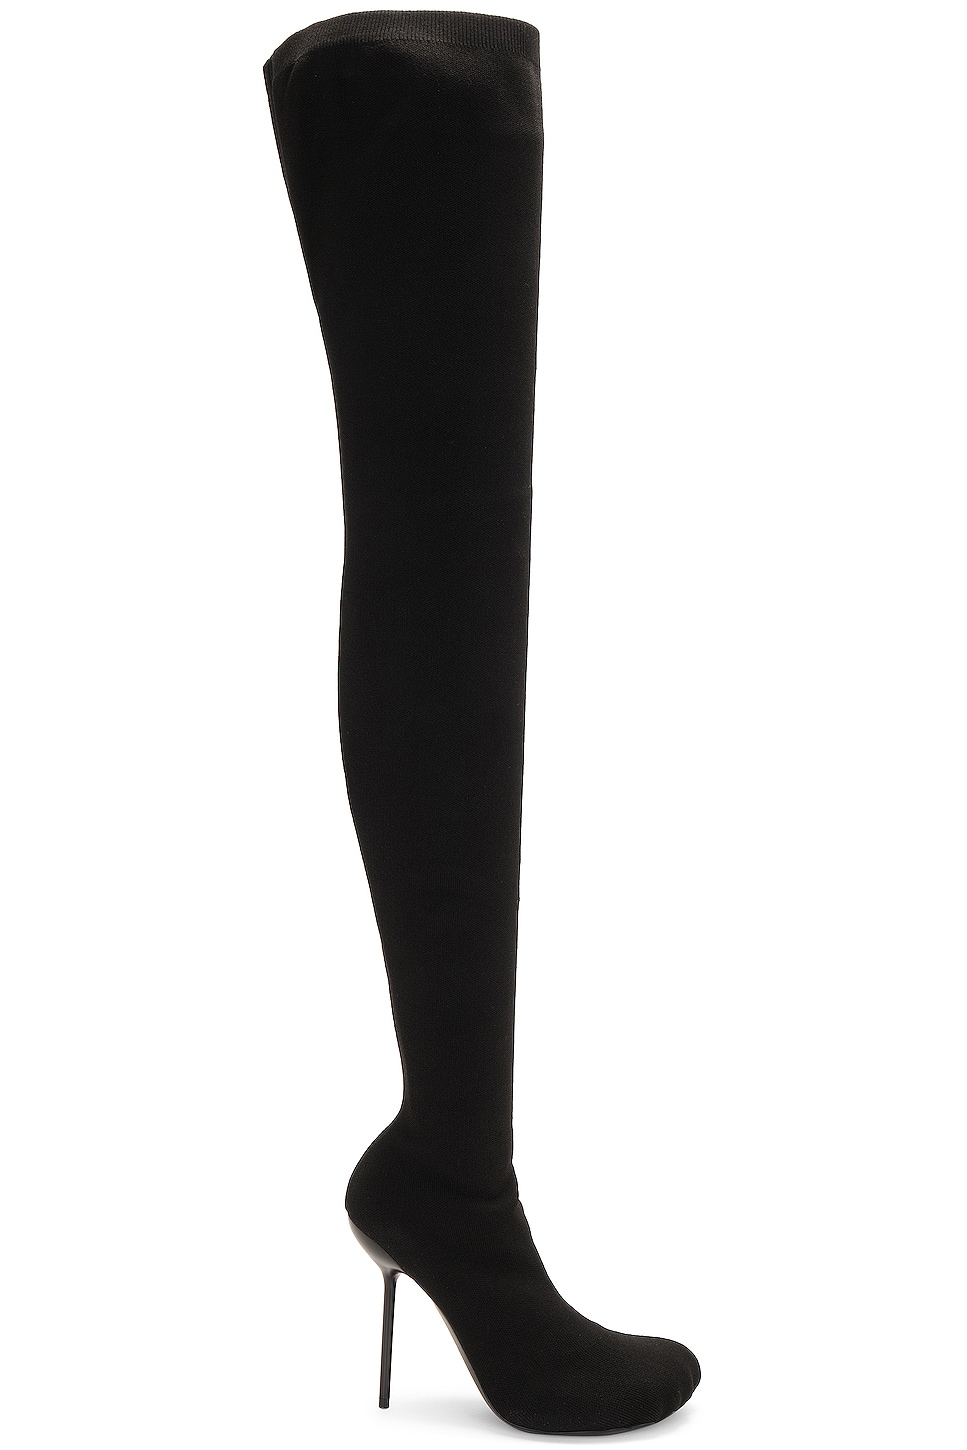 Image 1 of Balenciaga Anatomic 110 Over The Knee Boot in Black